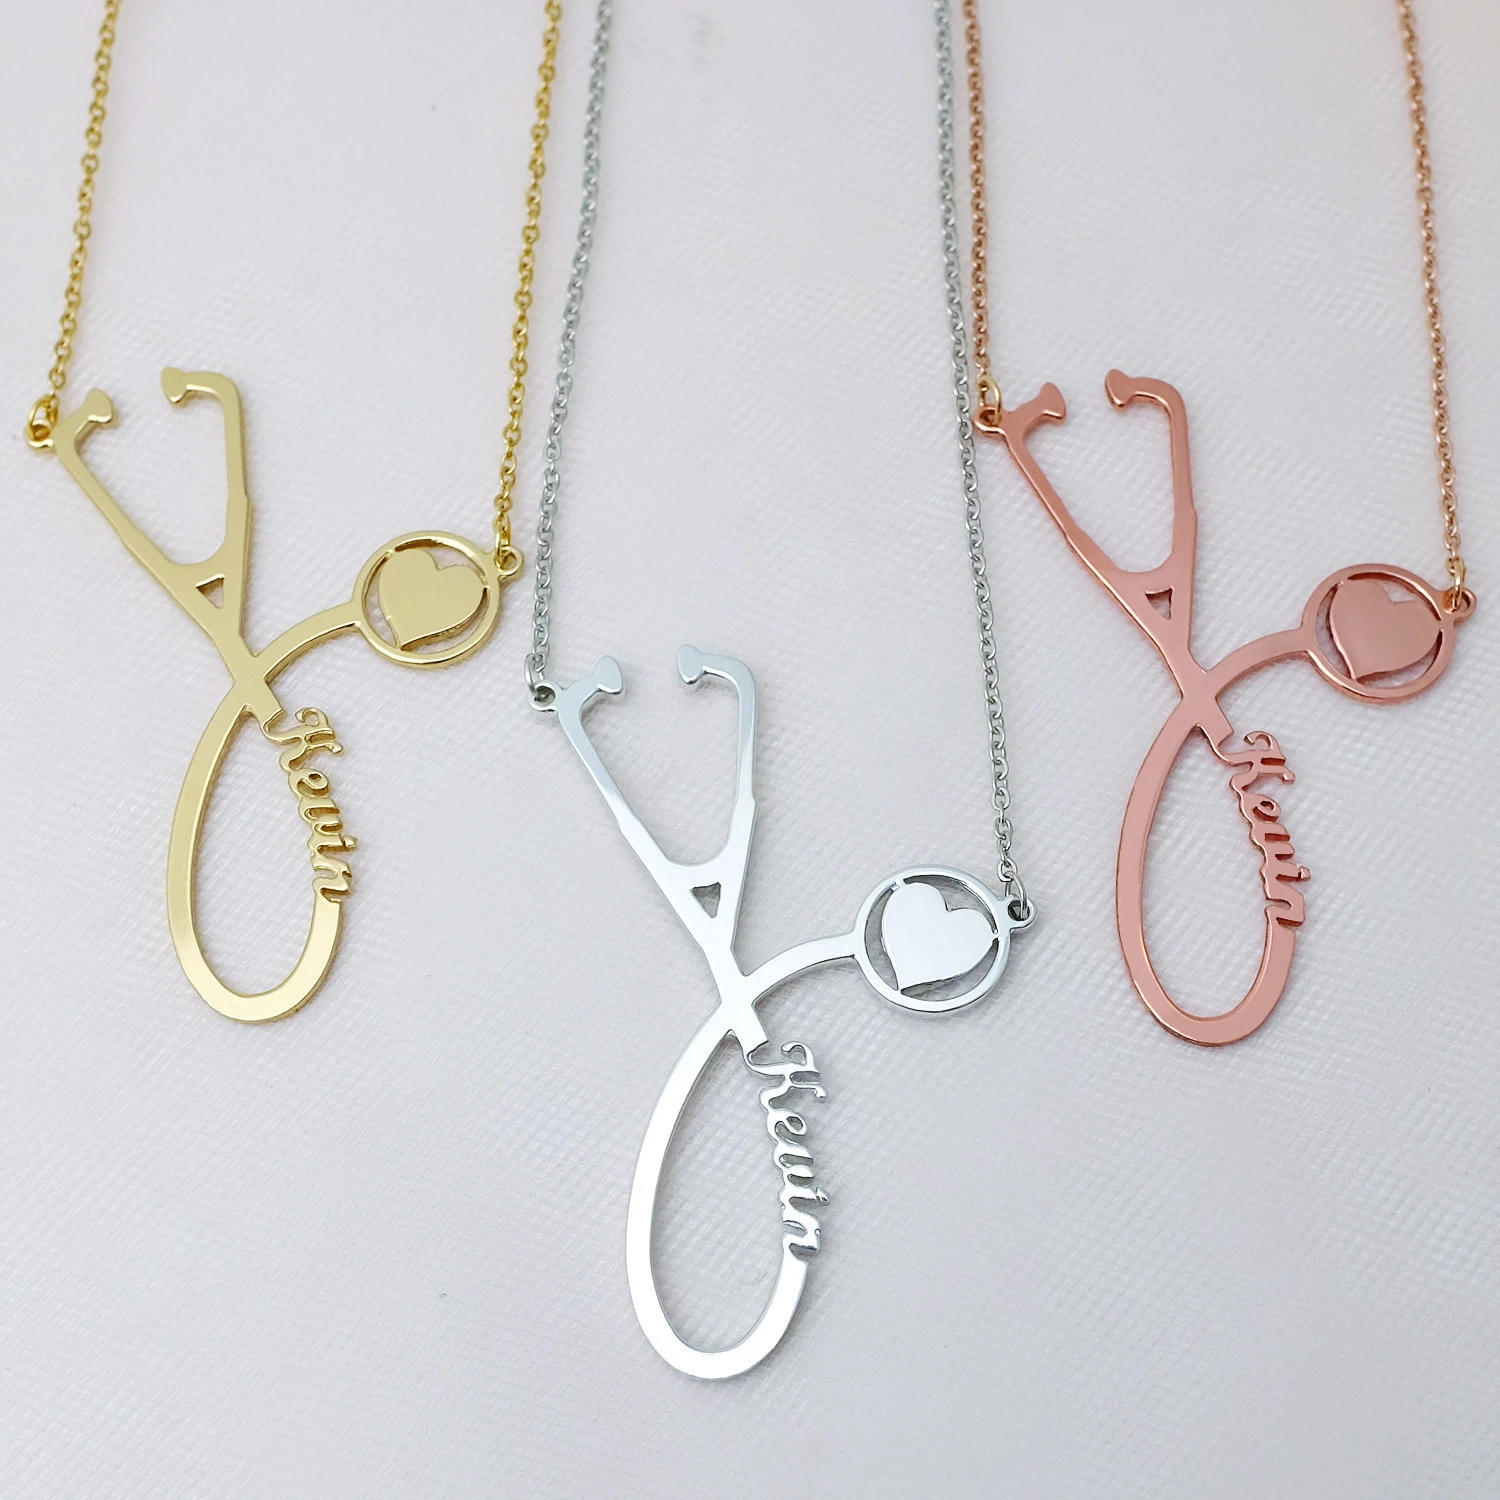 Custom Stethoscope Name Necklace Customized Engraved Nurse Pendants  Gifts for Medical Student Doctor Nurse Gift